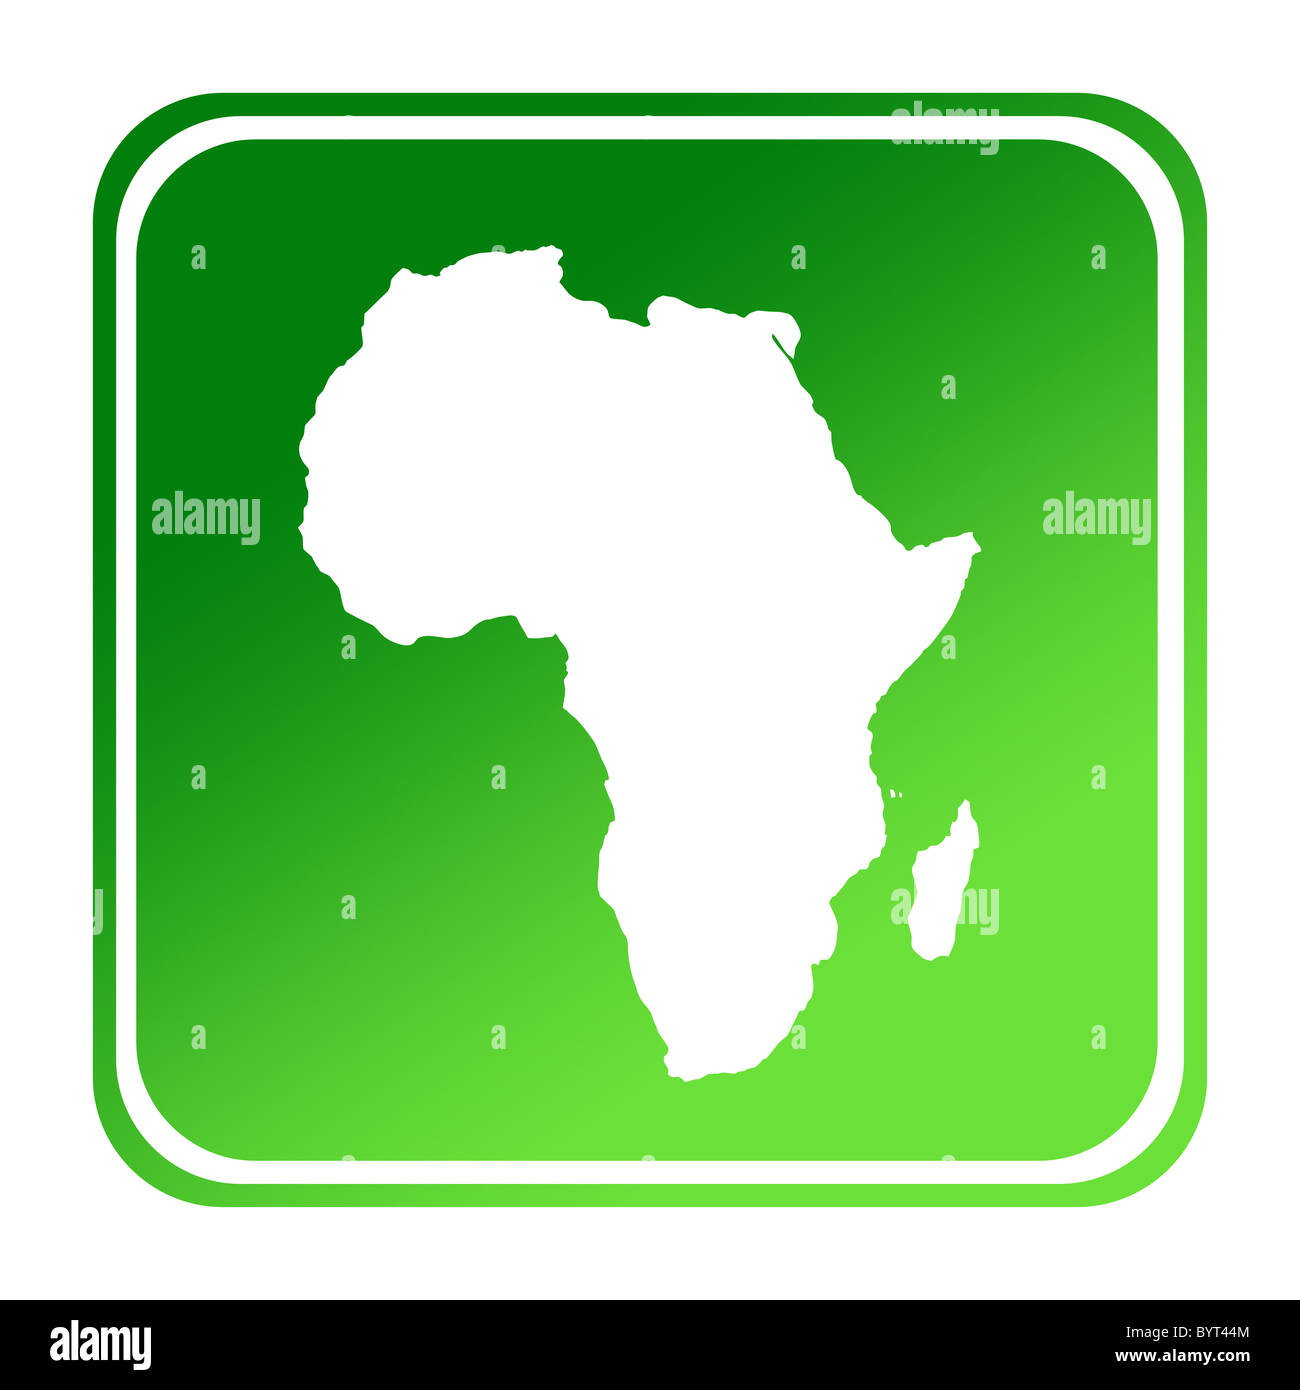 African continent map button in gradient green; isolated on white background with clipping path. Stock Photo